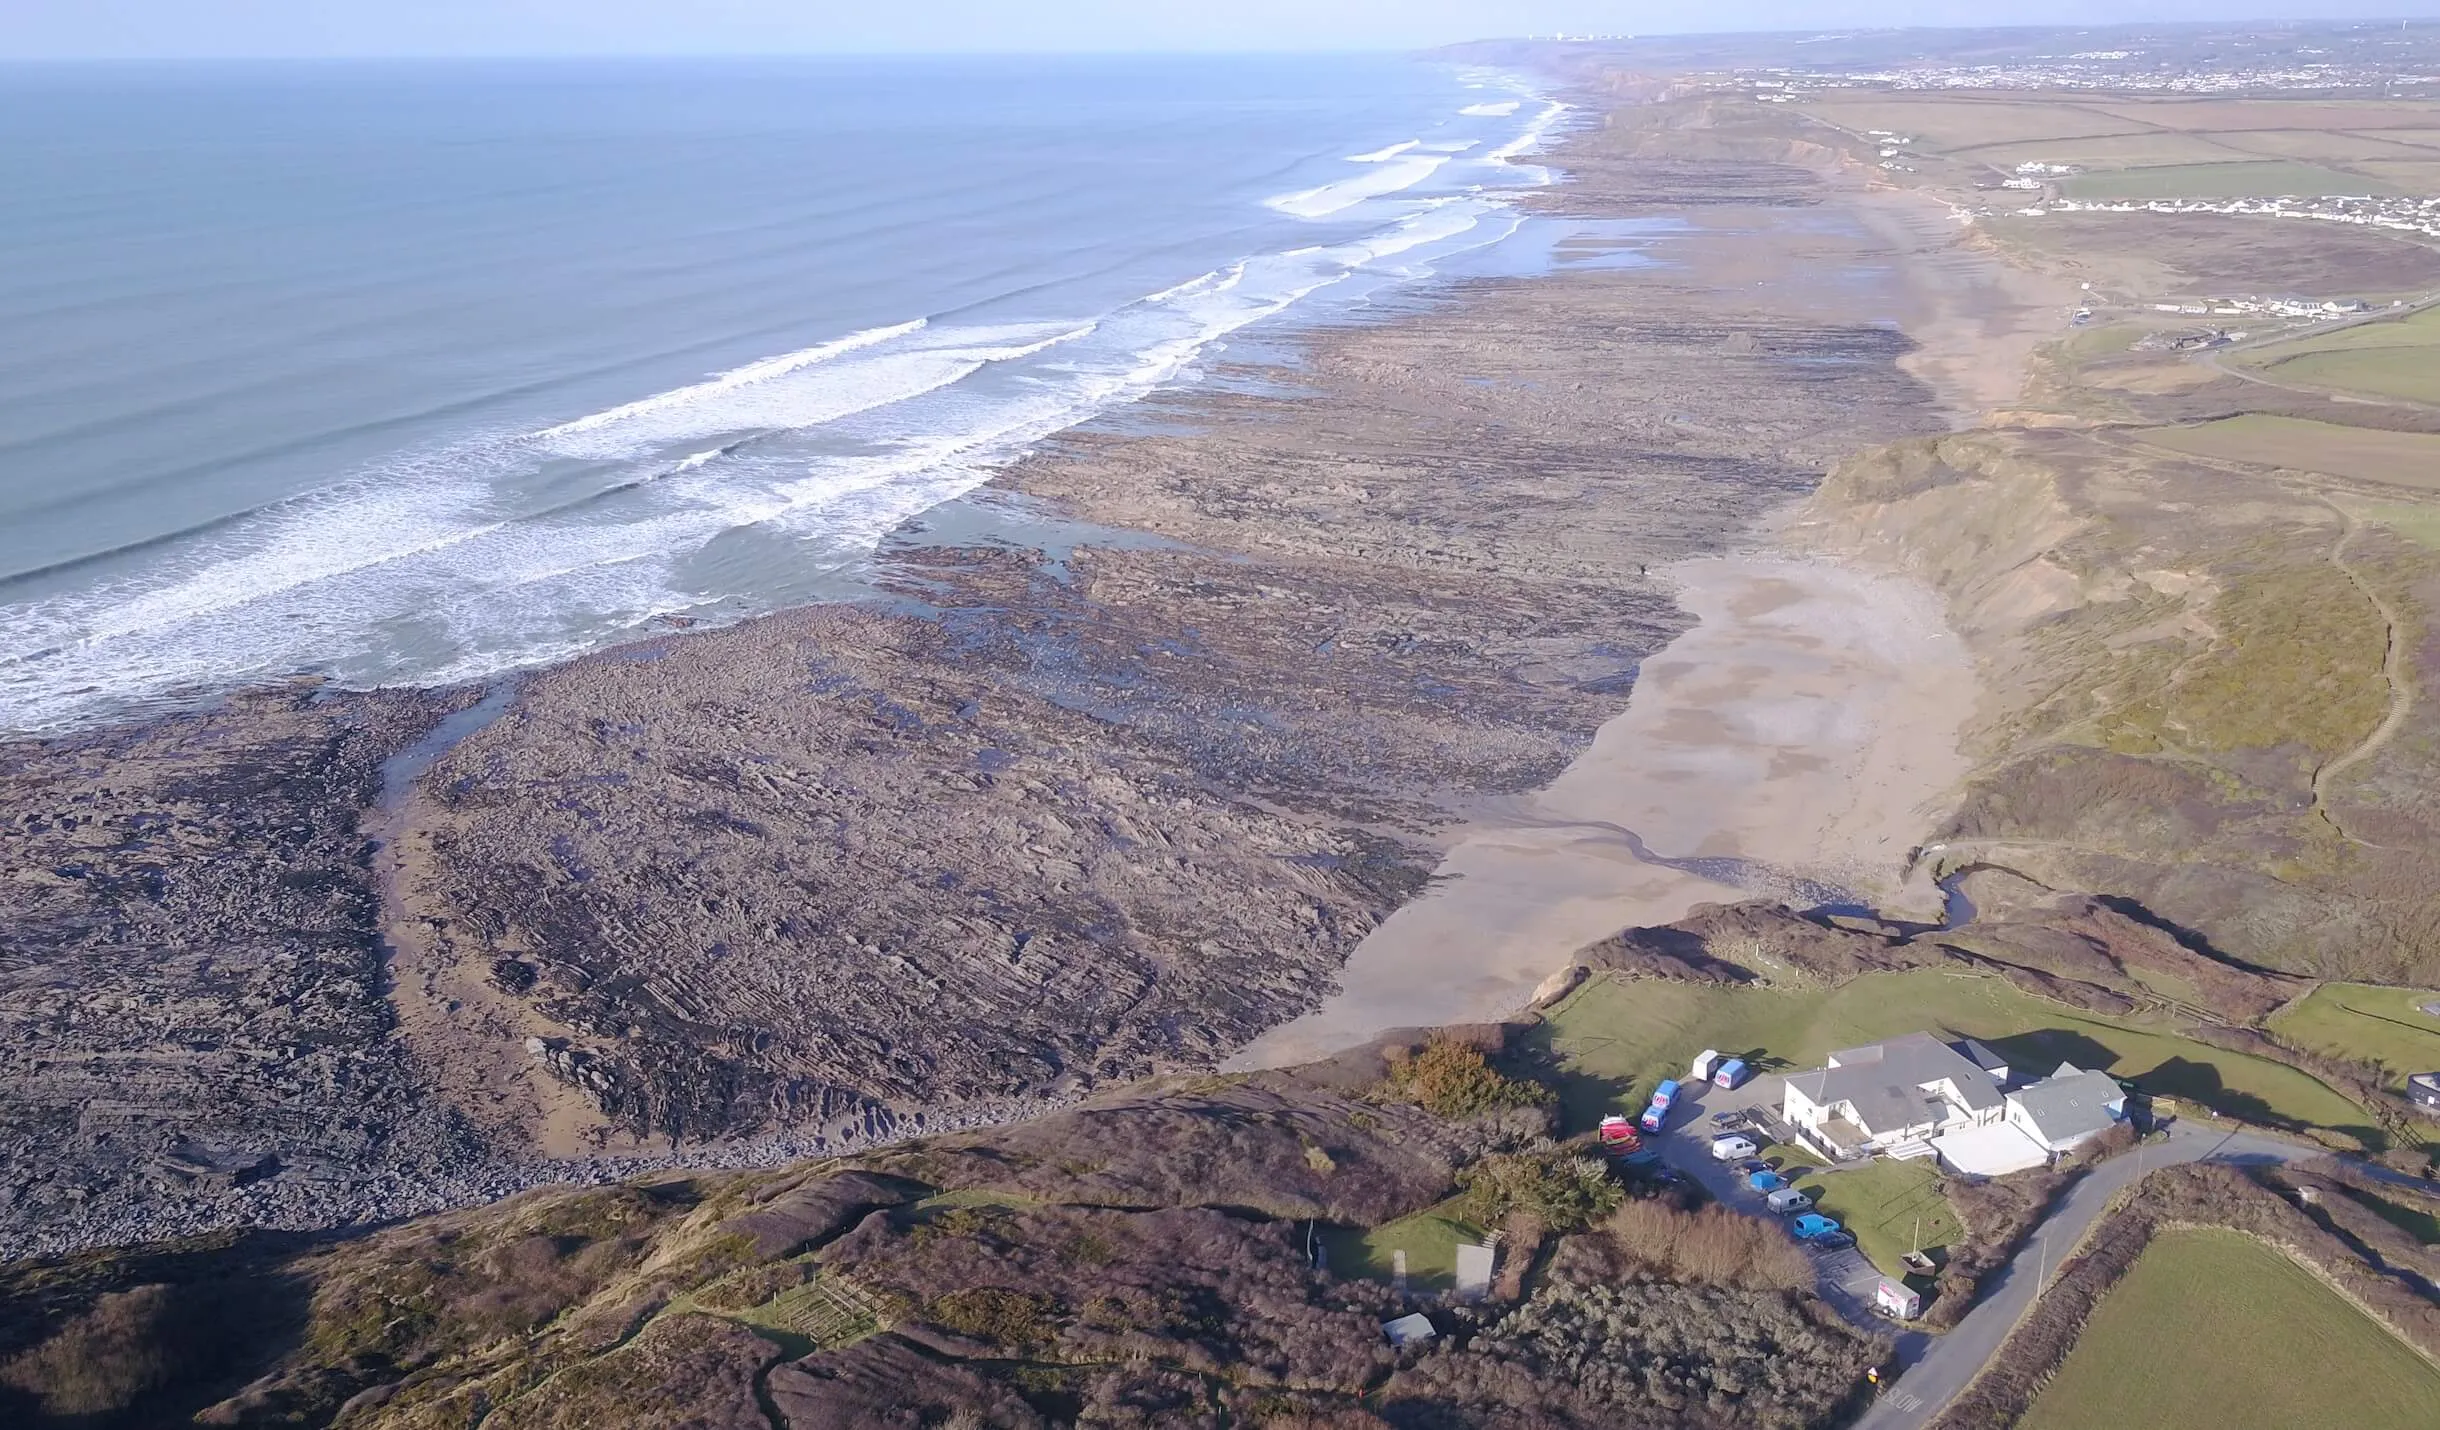 OA Surf club is situated on the cliff top with views up the coast to bude and over the sea